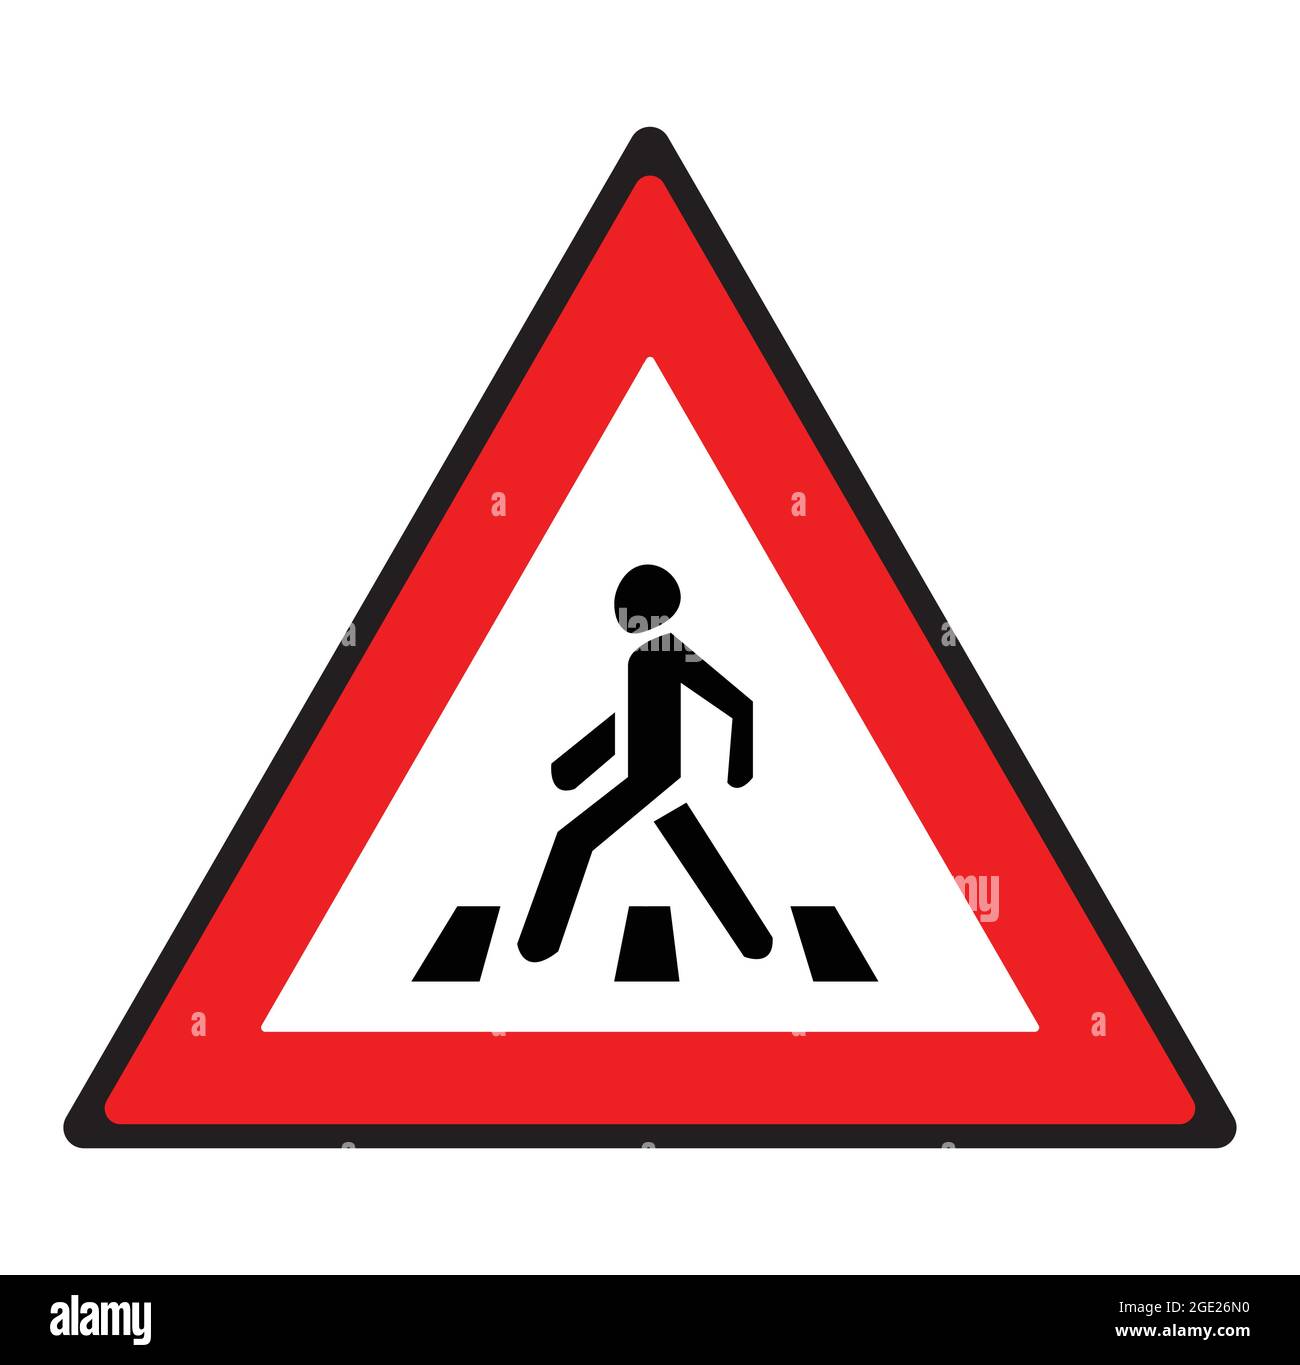 Pedestrian crossing road sign. Safety symbol. Stock Vector